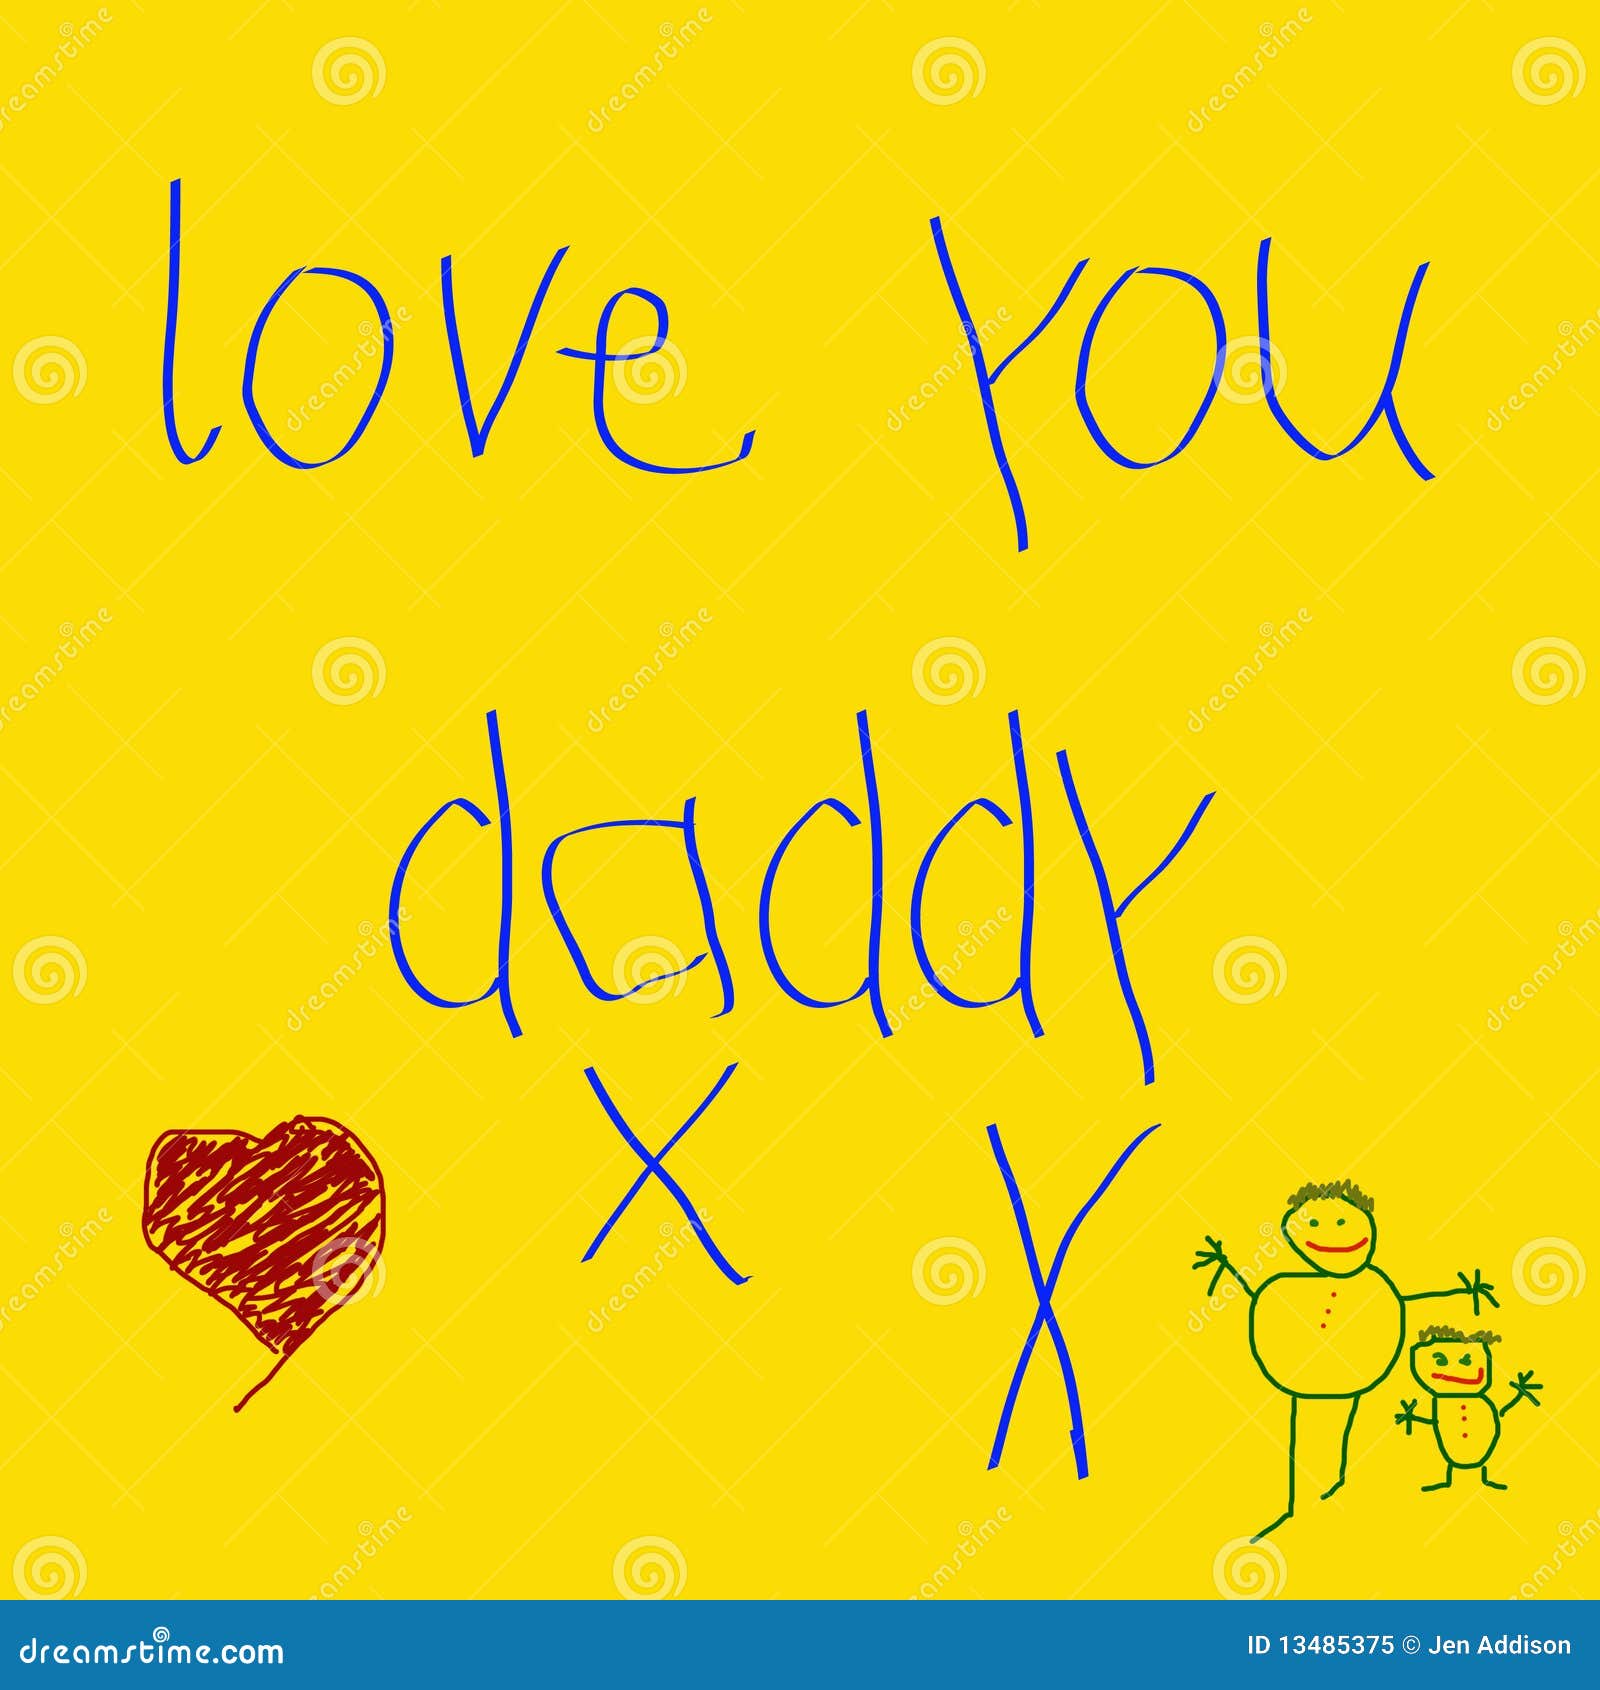 Love You Daddy Vector Stock Vector Illustration Of Fingers 13485375